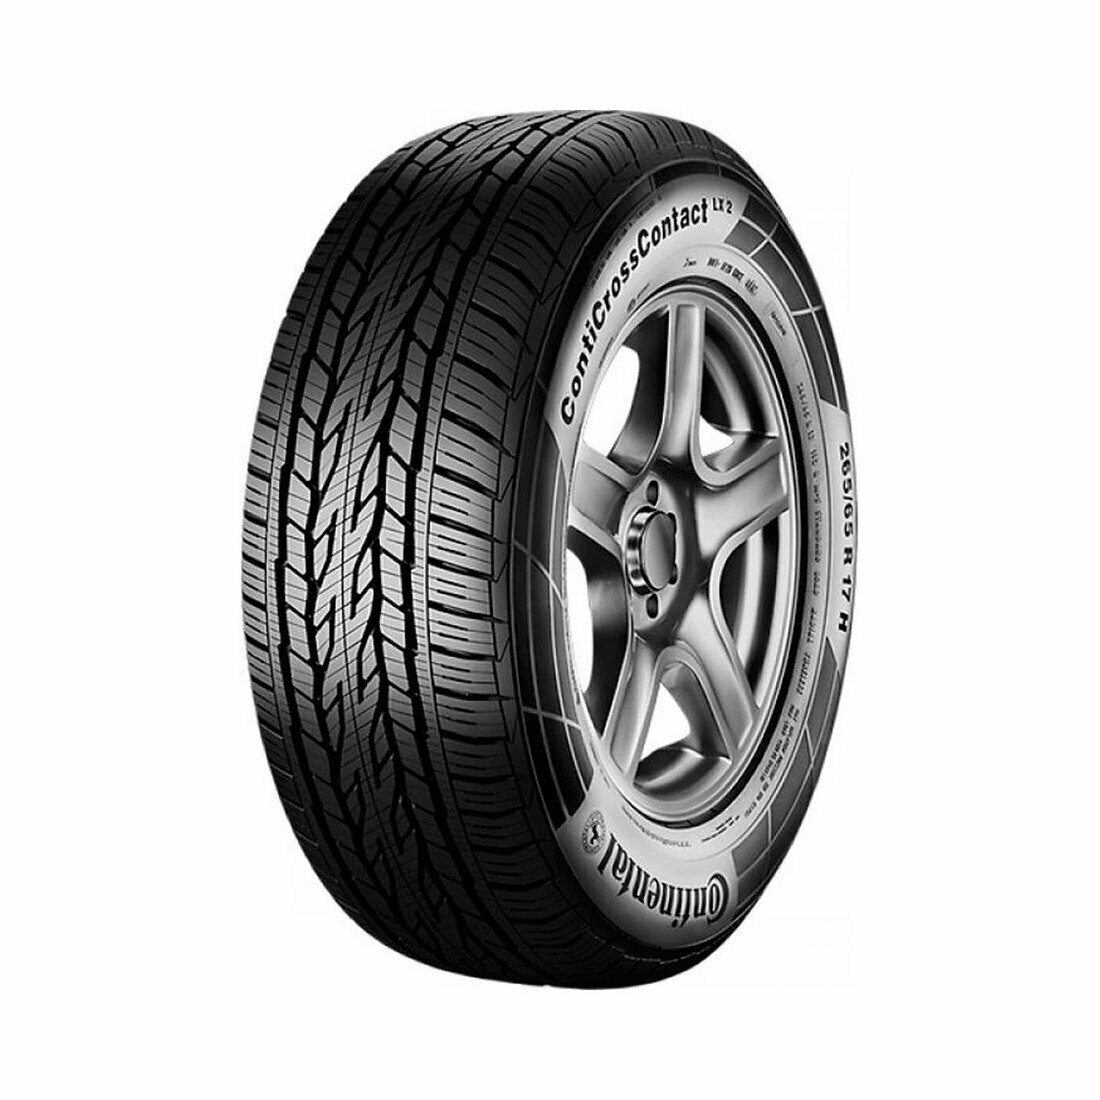 Автошина Continental ContiCrossContact LX 2 205/70 R15 96H